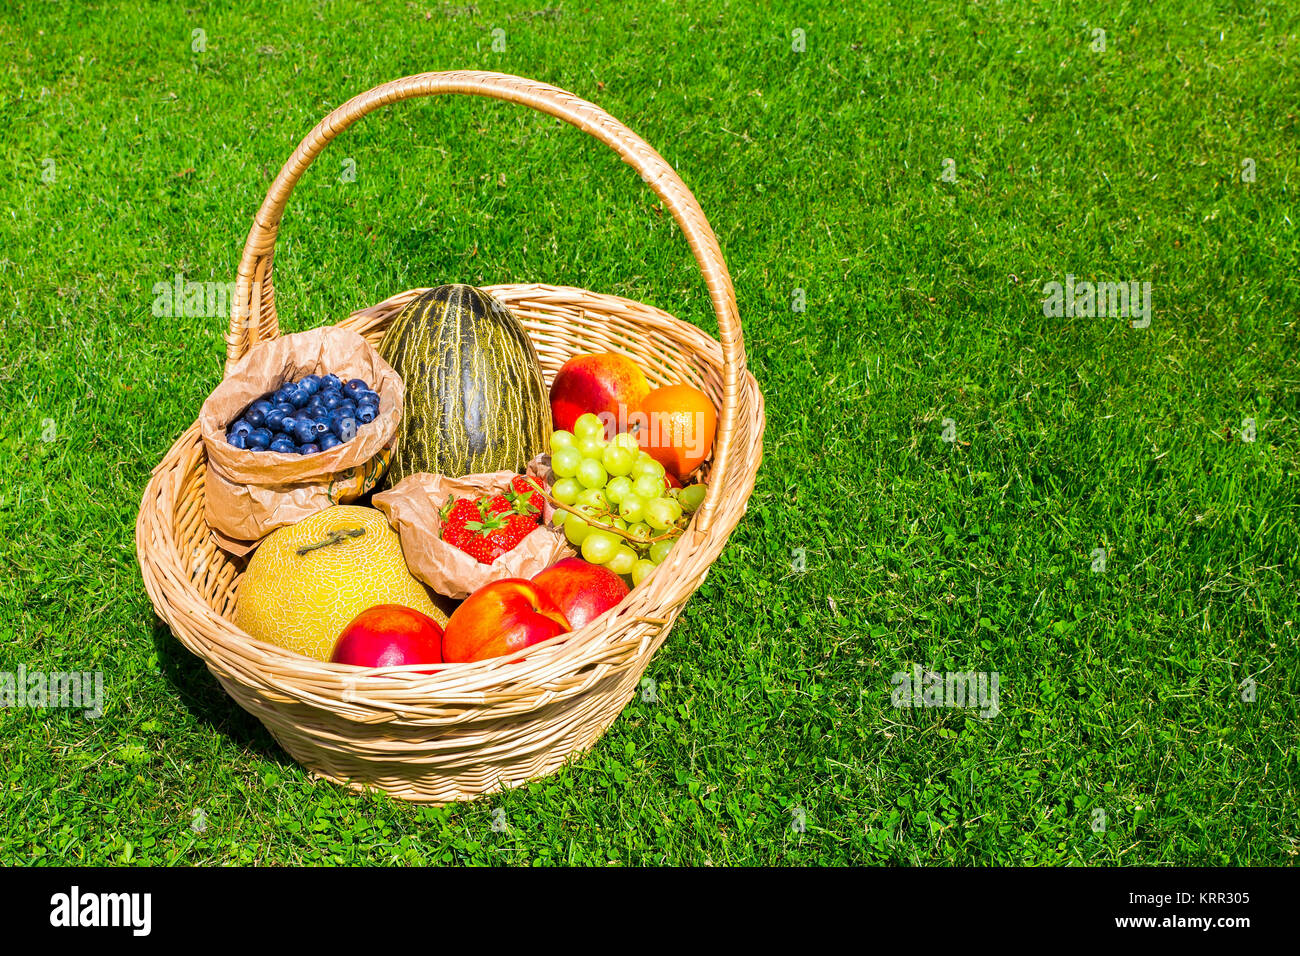 Wicker basket on green grass filled with summer fruit Stock Photo